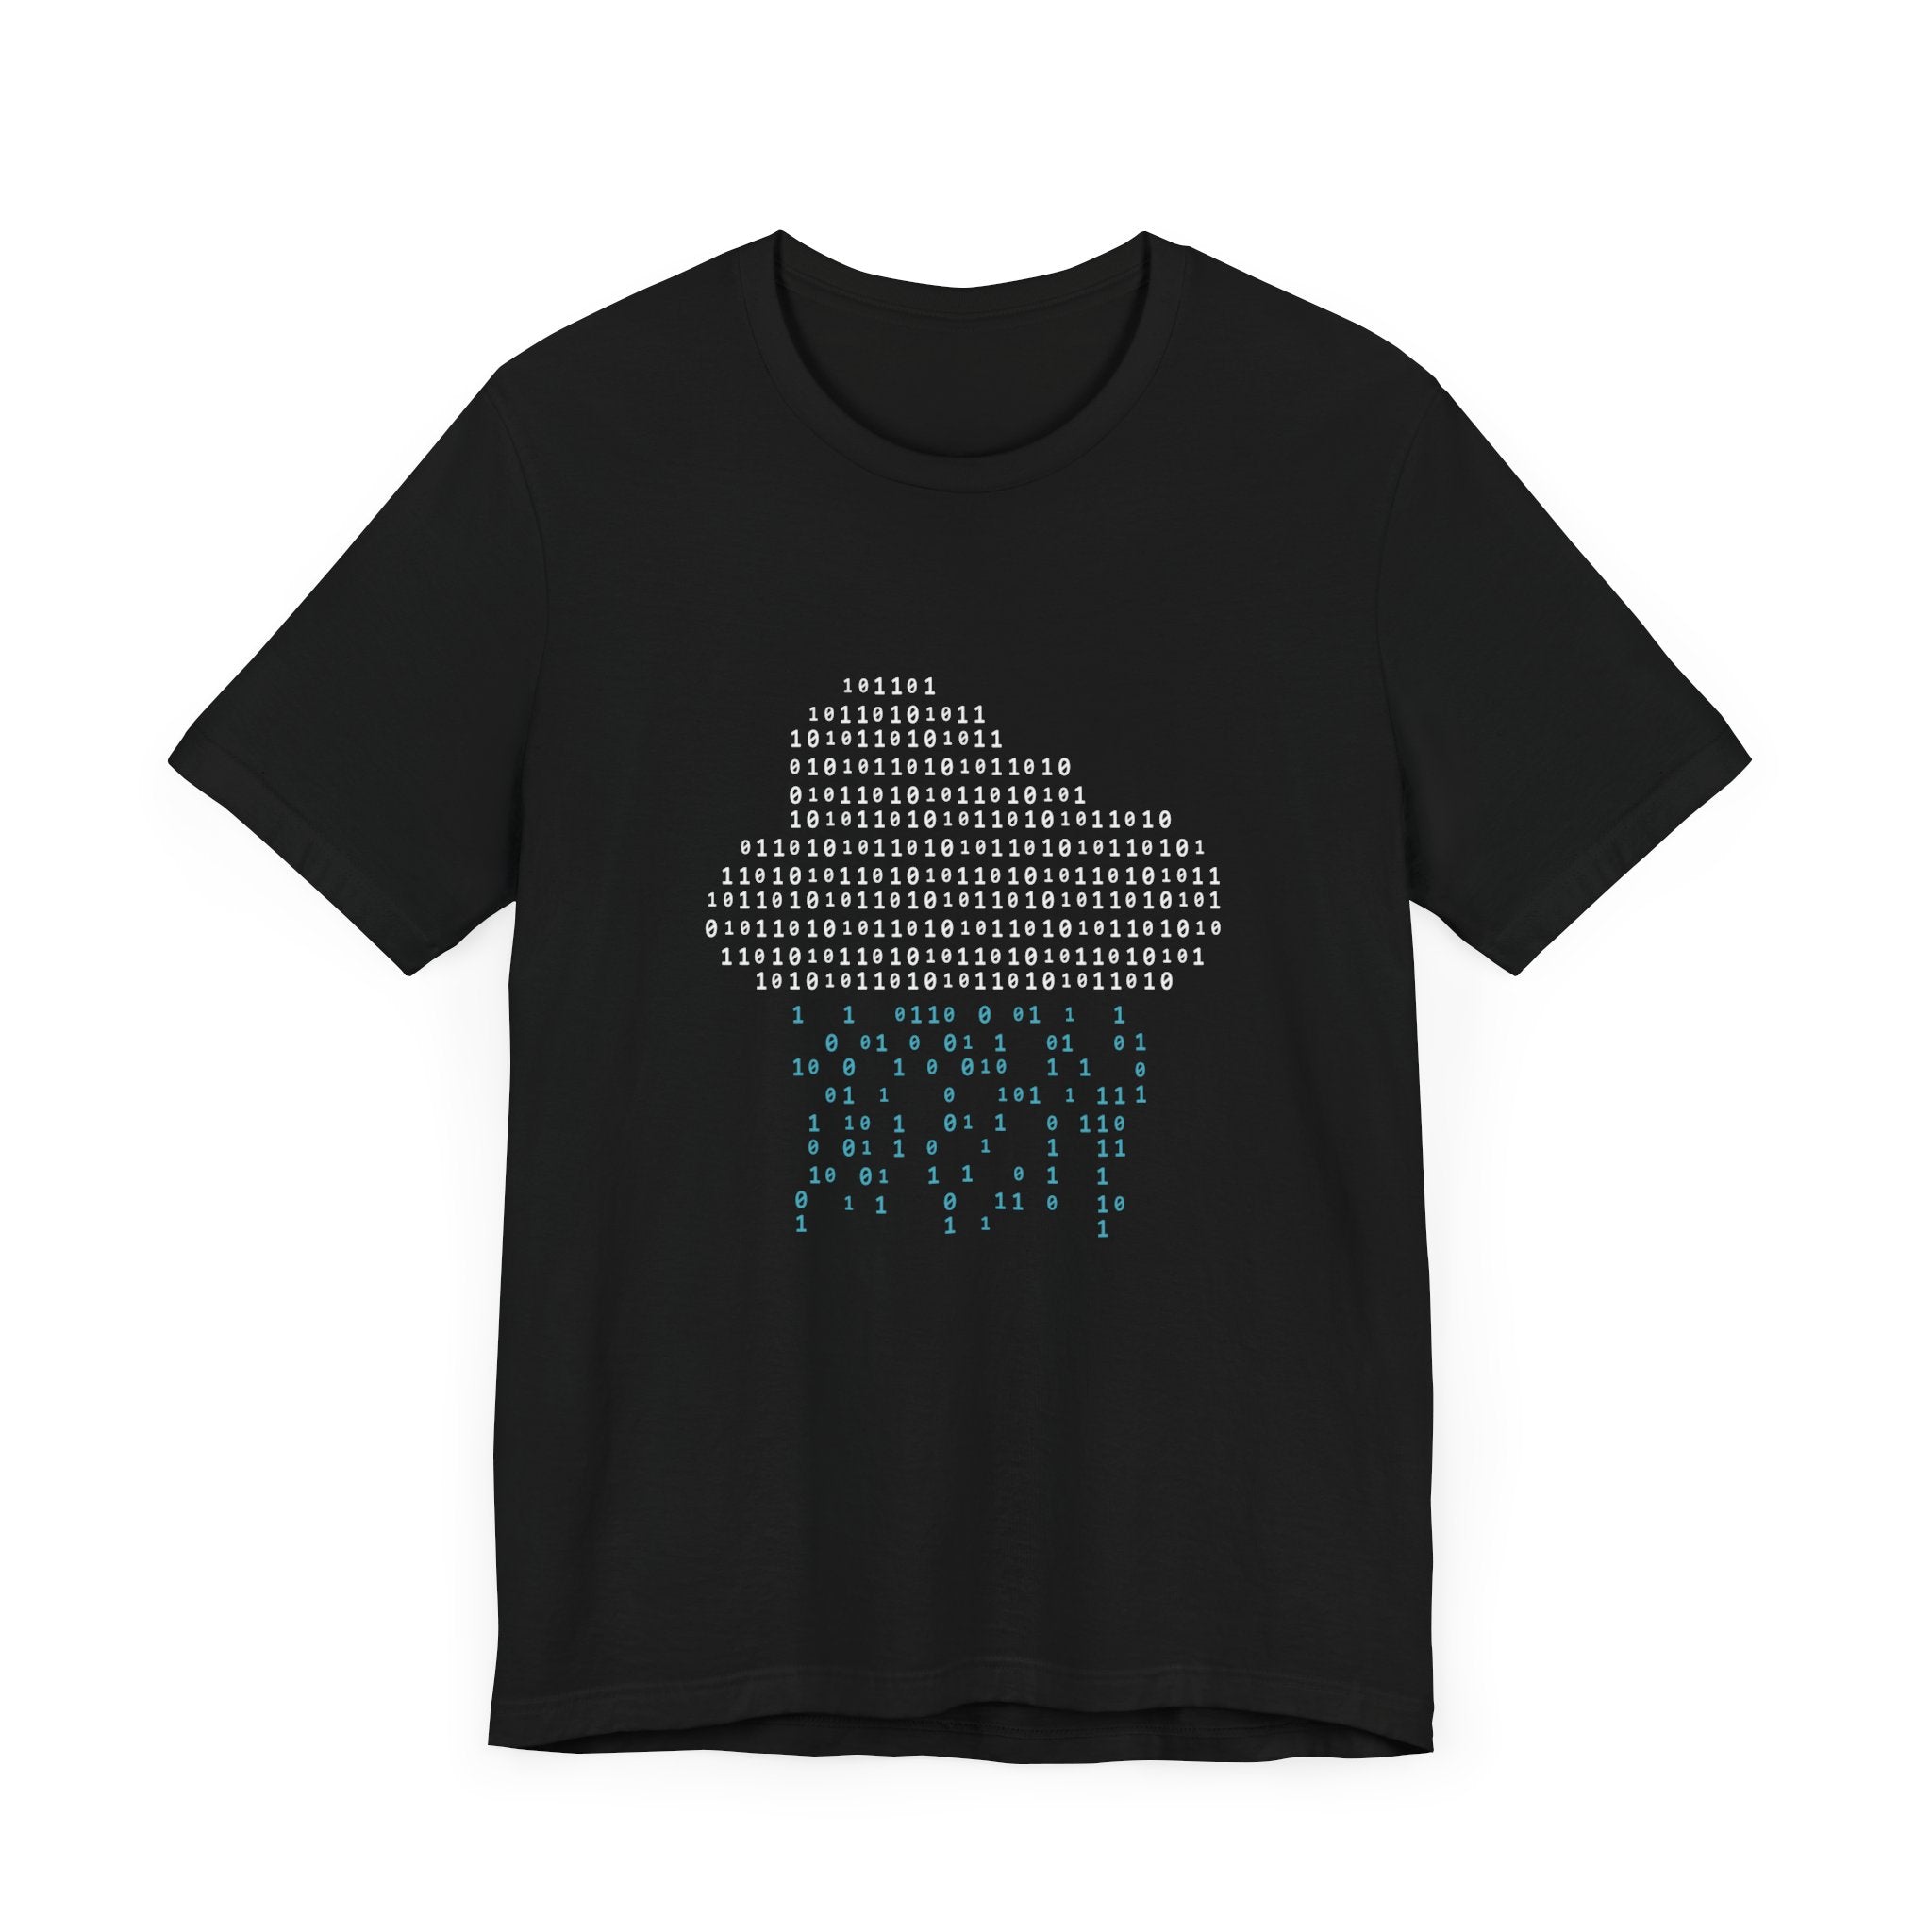 Black T-shirt with a pixelated graphic of an umbrella, made from blue and white binary code numbers. Crafted from soft Airlume combed ring-spun cotton, this Binary Rain Cloud - T-Shirt offers comfort and style in one unique design.